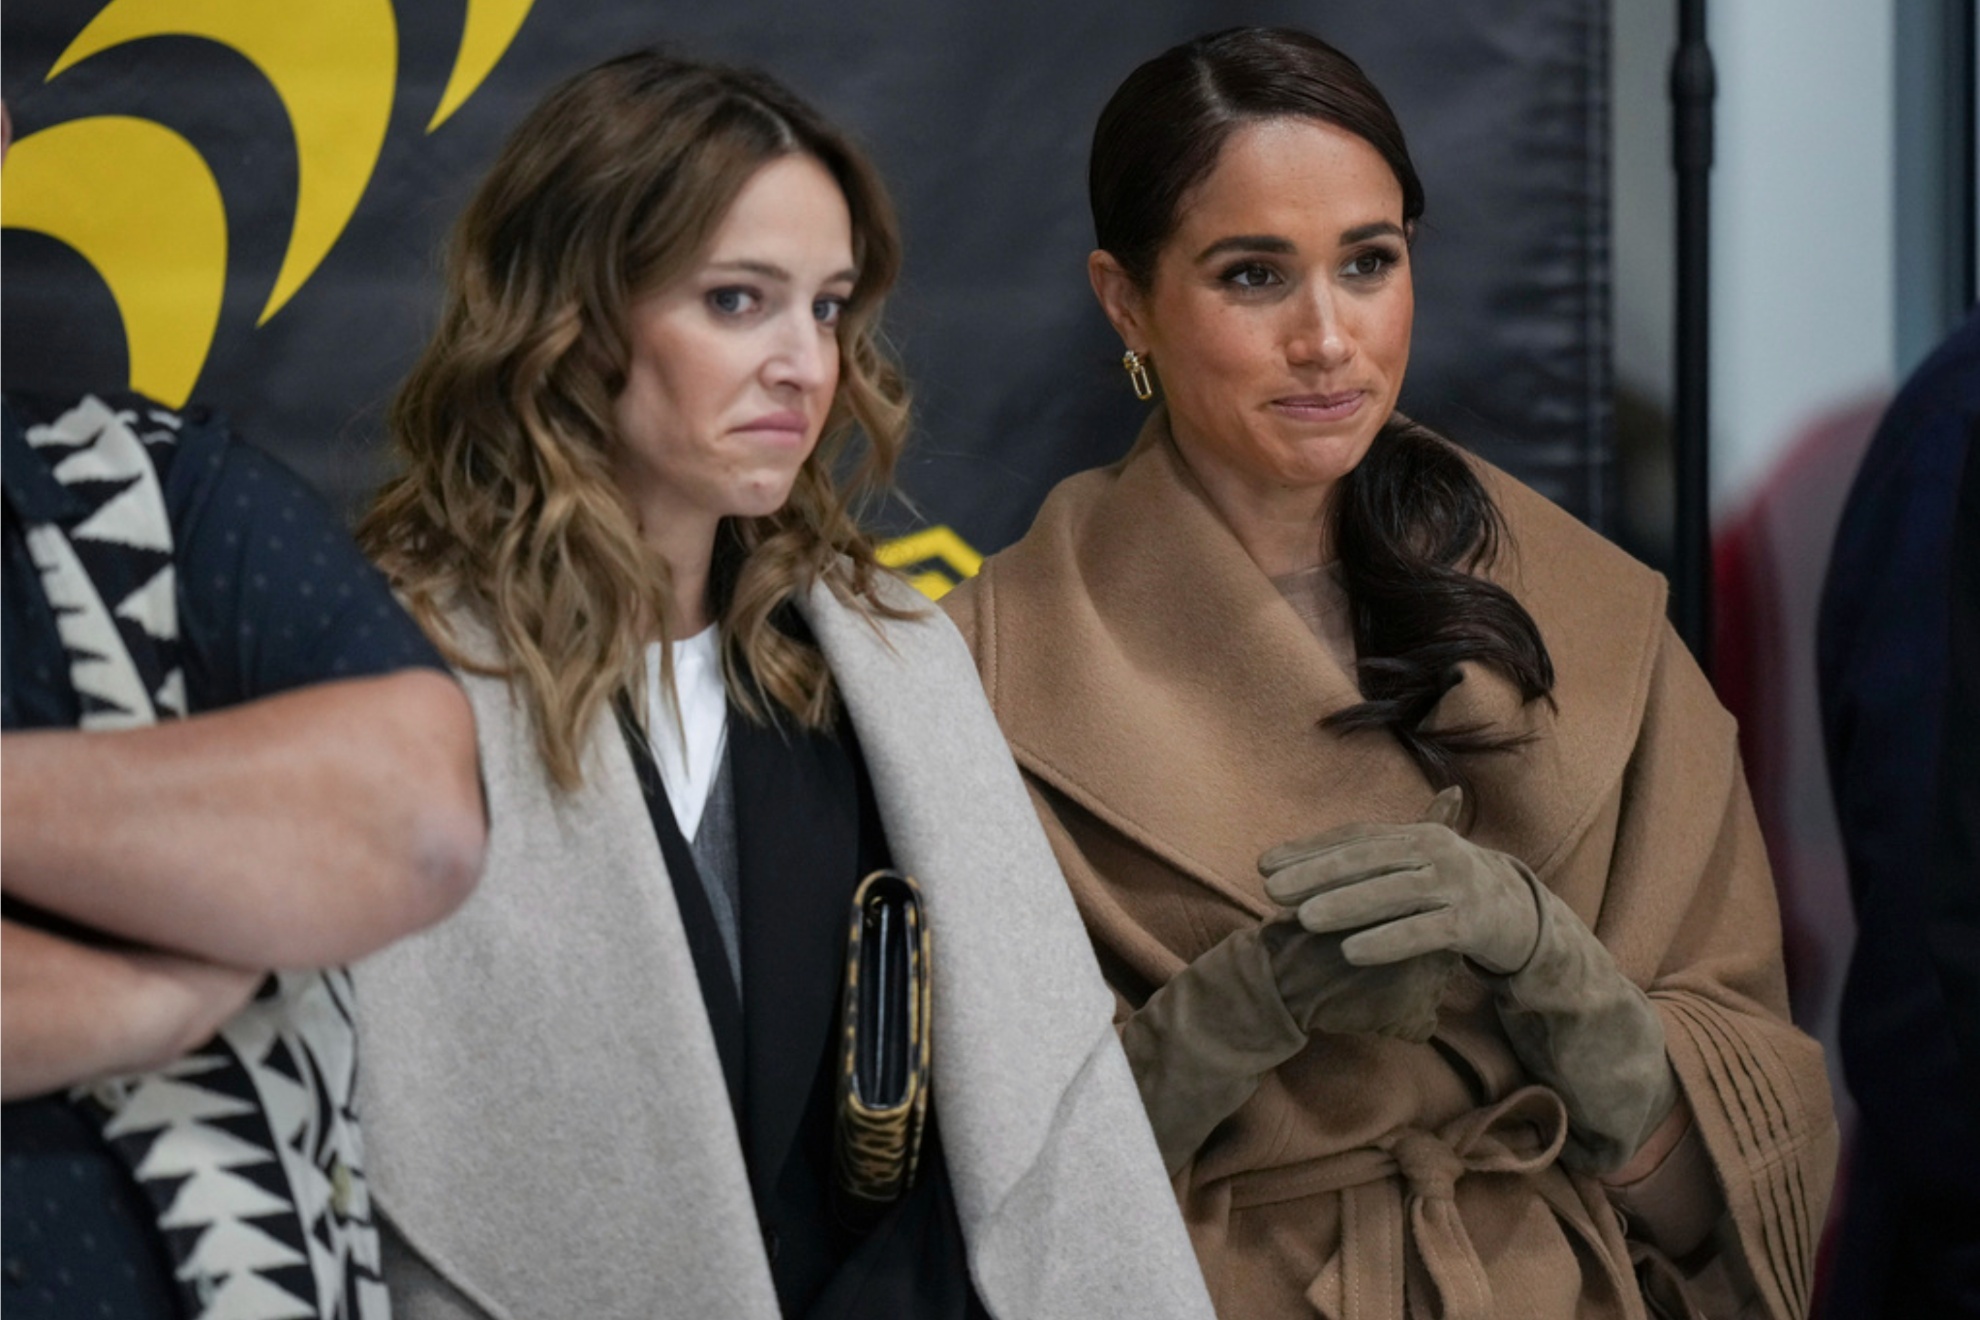 Meghan Markle (L) wearing the controversial outfit next to Louisiana Lopilato.